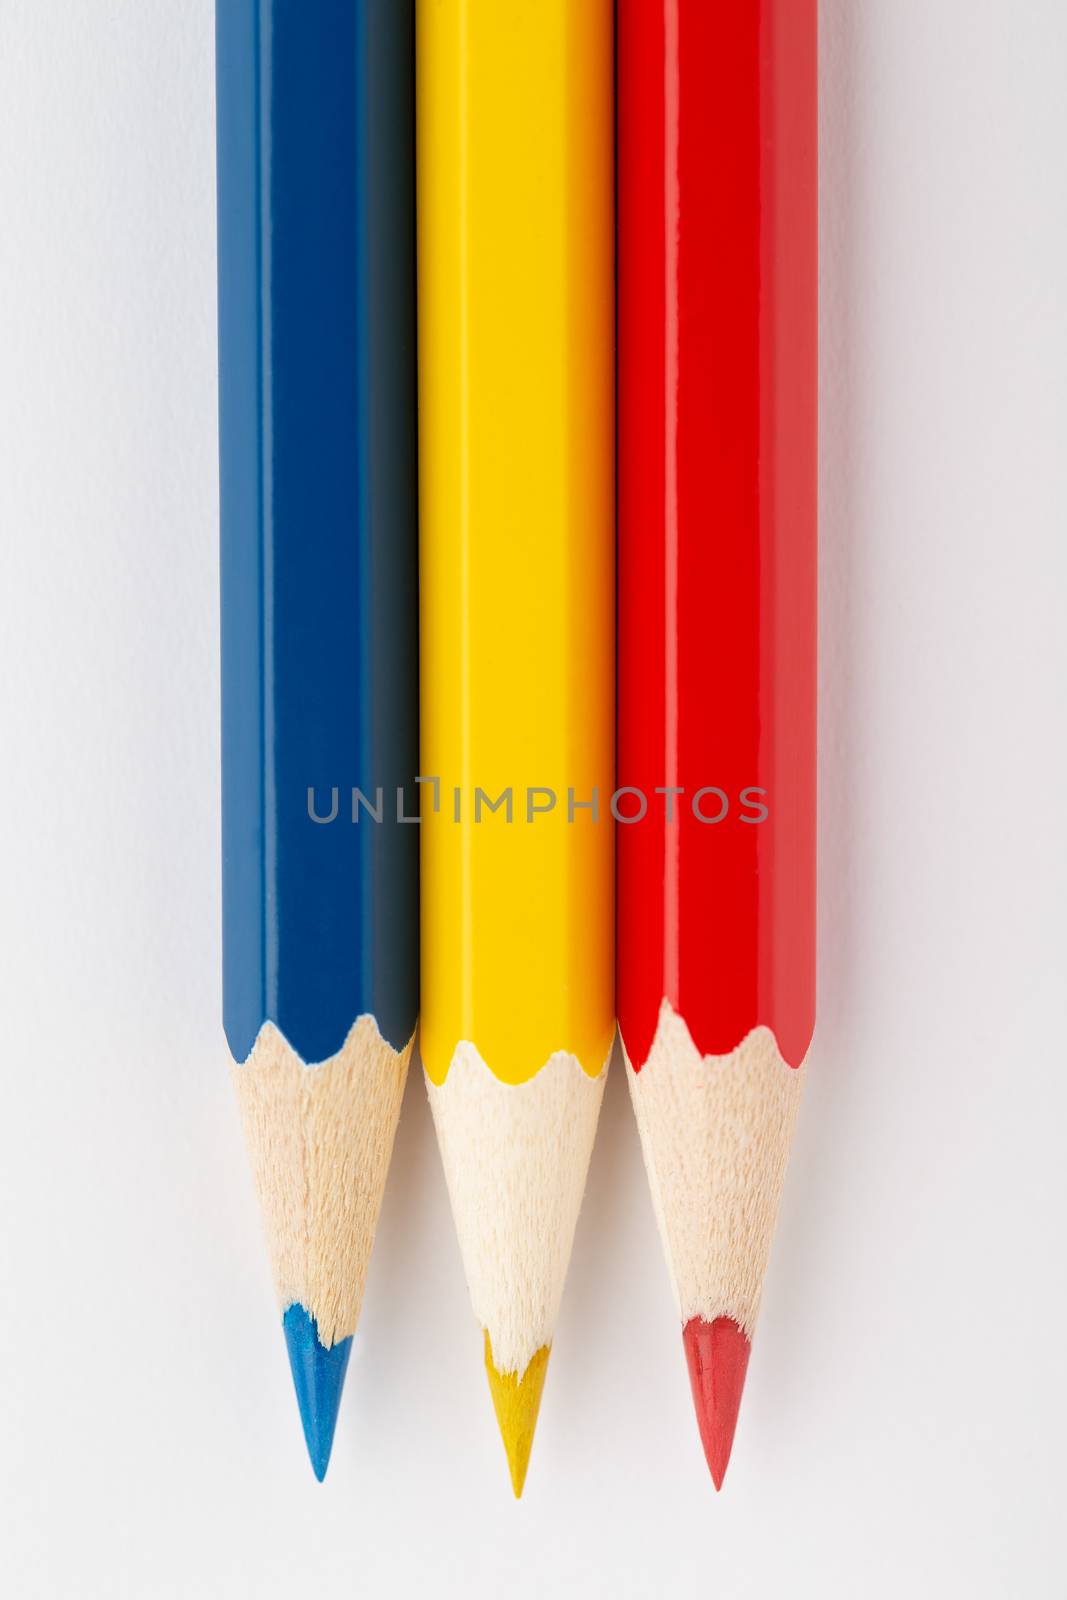 The State flags made of colorful wooden pencils Romania